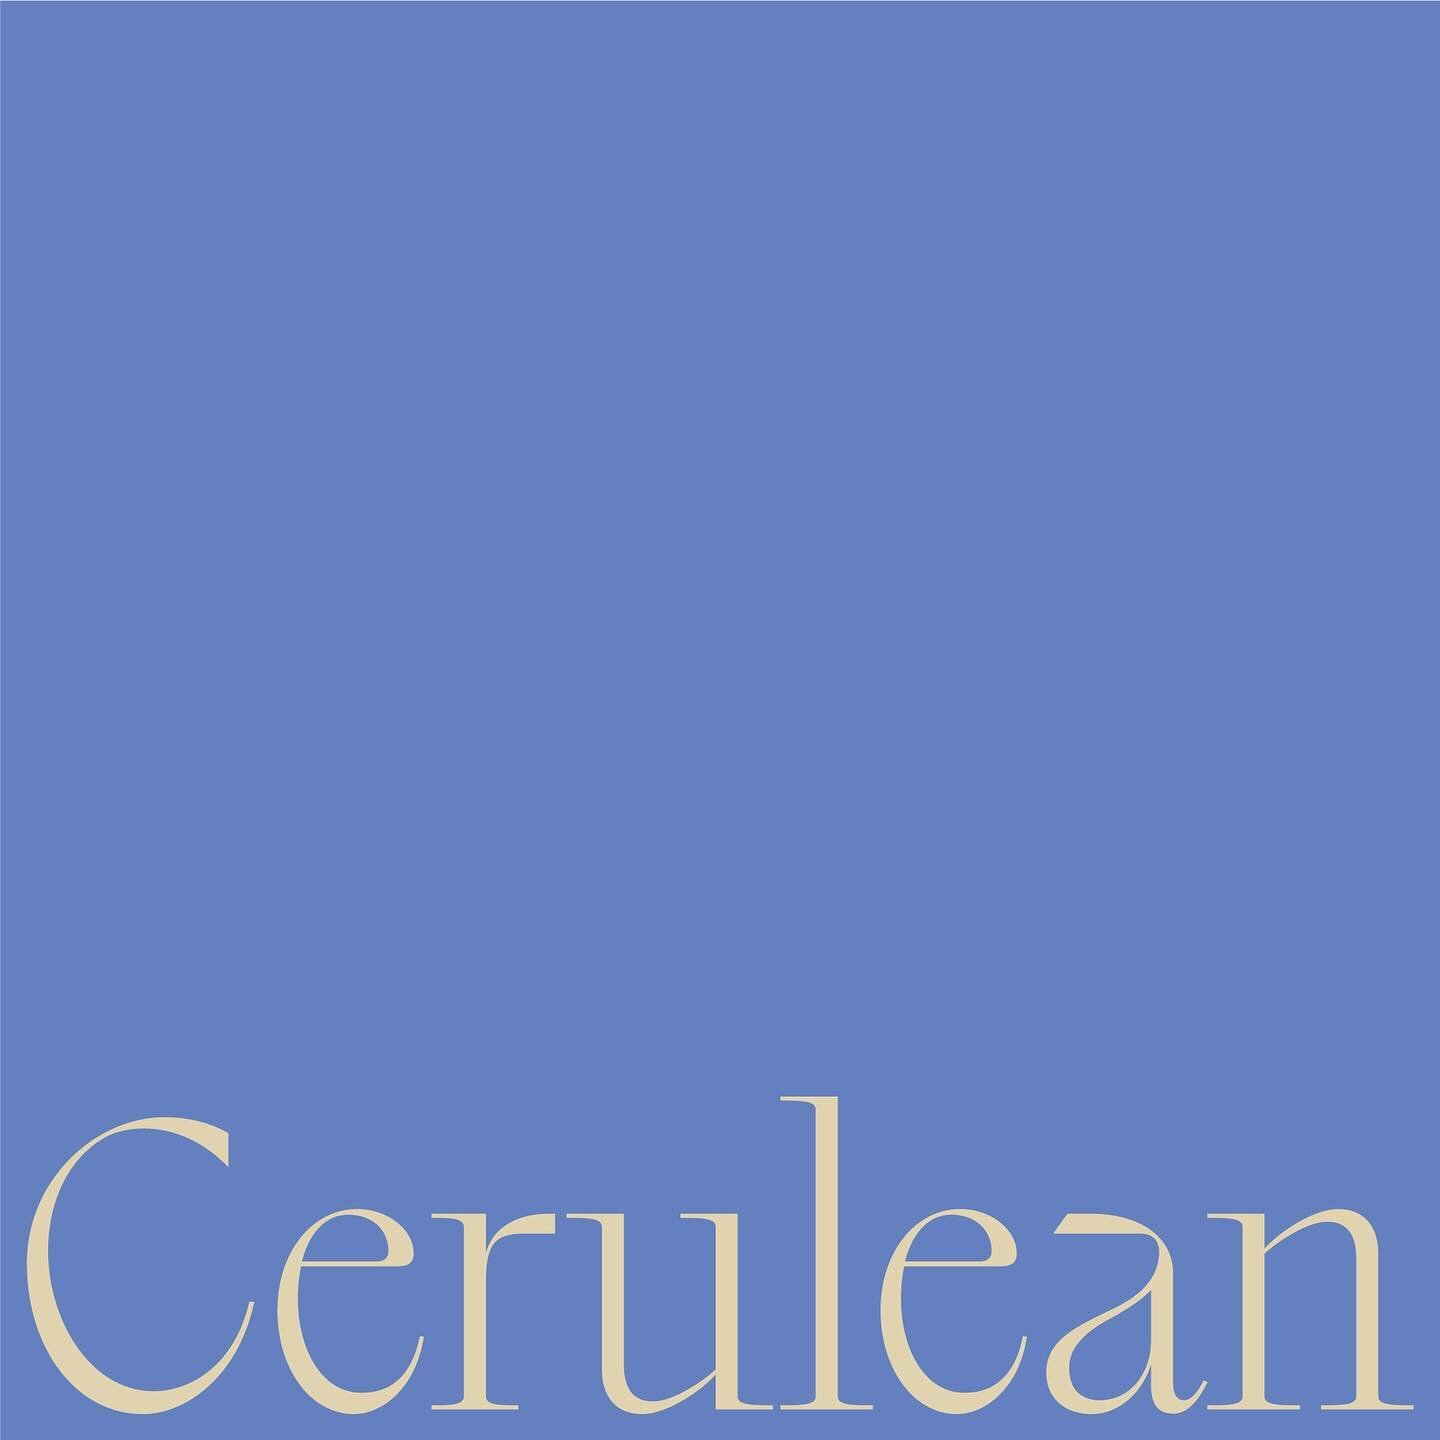 Starting the year on a high, and in high resolution. 

@about.cerulean is a newly launched client-side consulting firm for built spaces, based in Sydney. Established in 2023, Cerulean treads a different path. Combining vast global experience with div